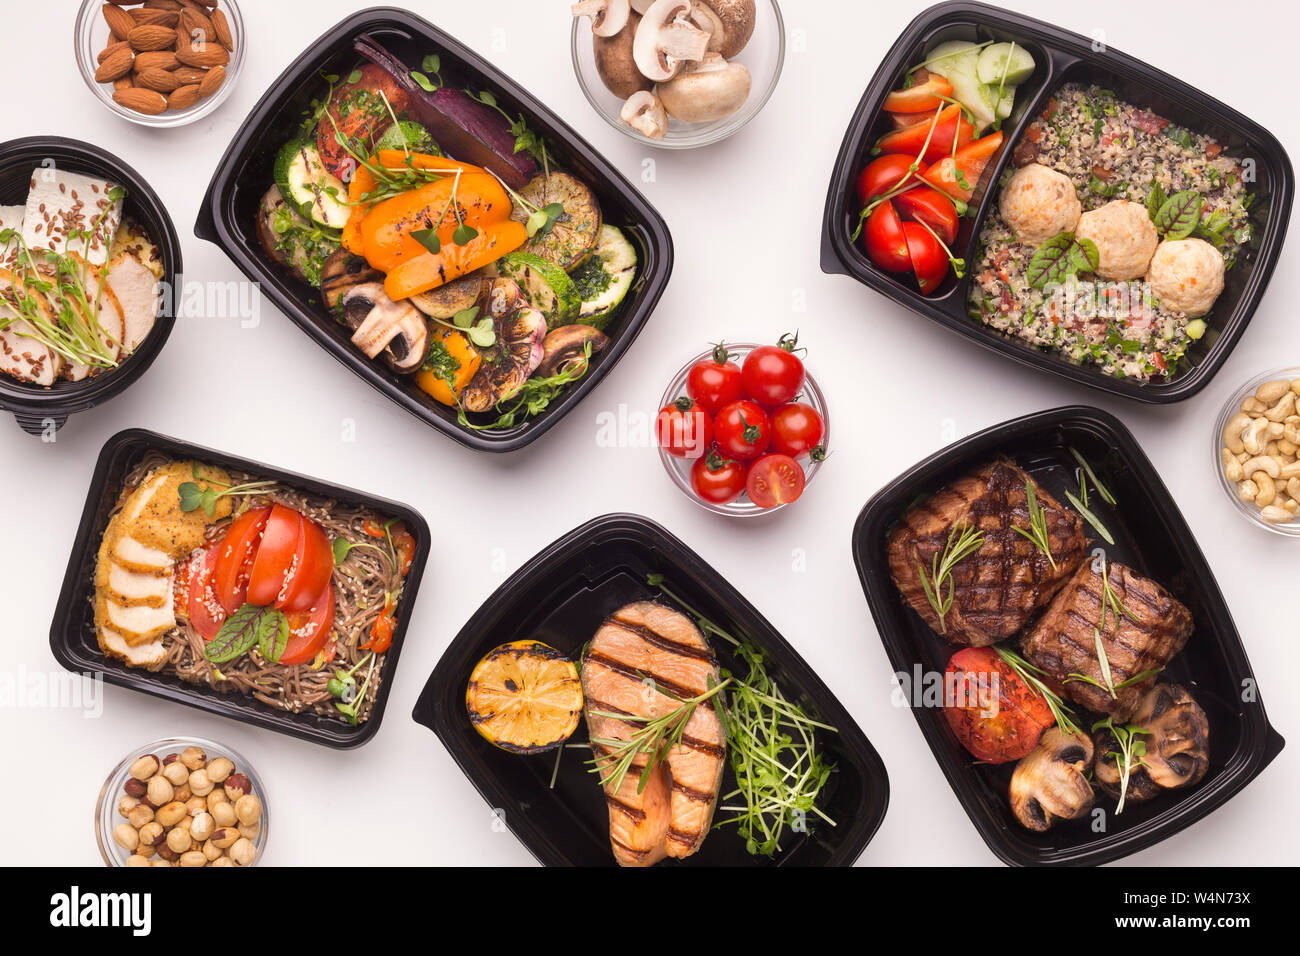 Restaurant healthy food delivery in take away boxes Stock Photo